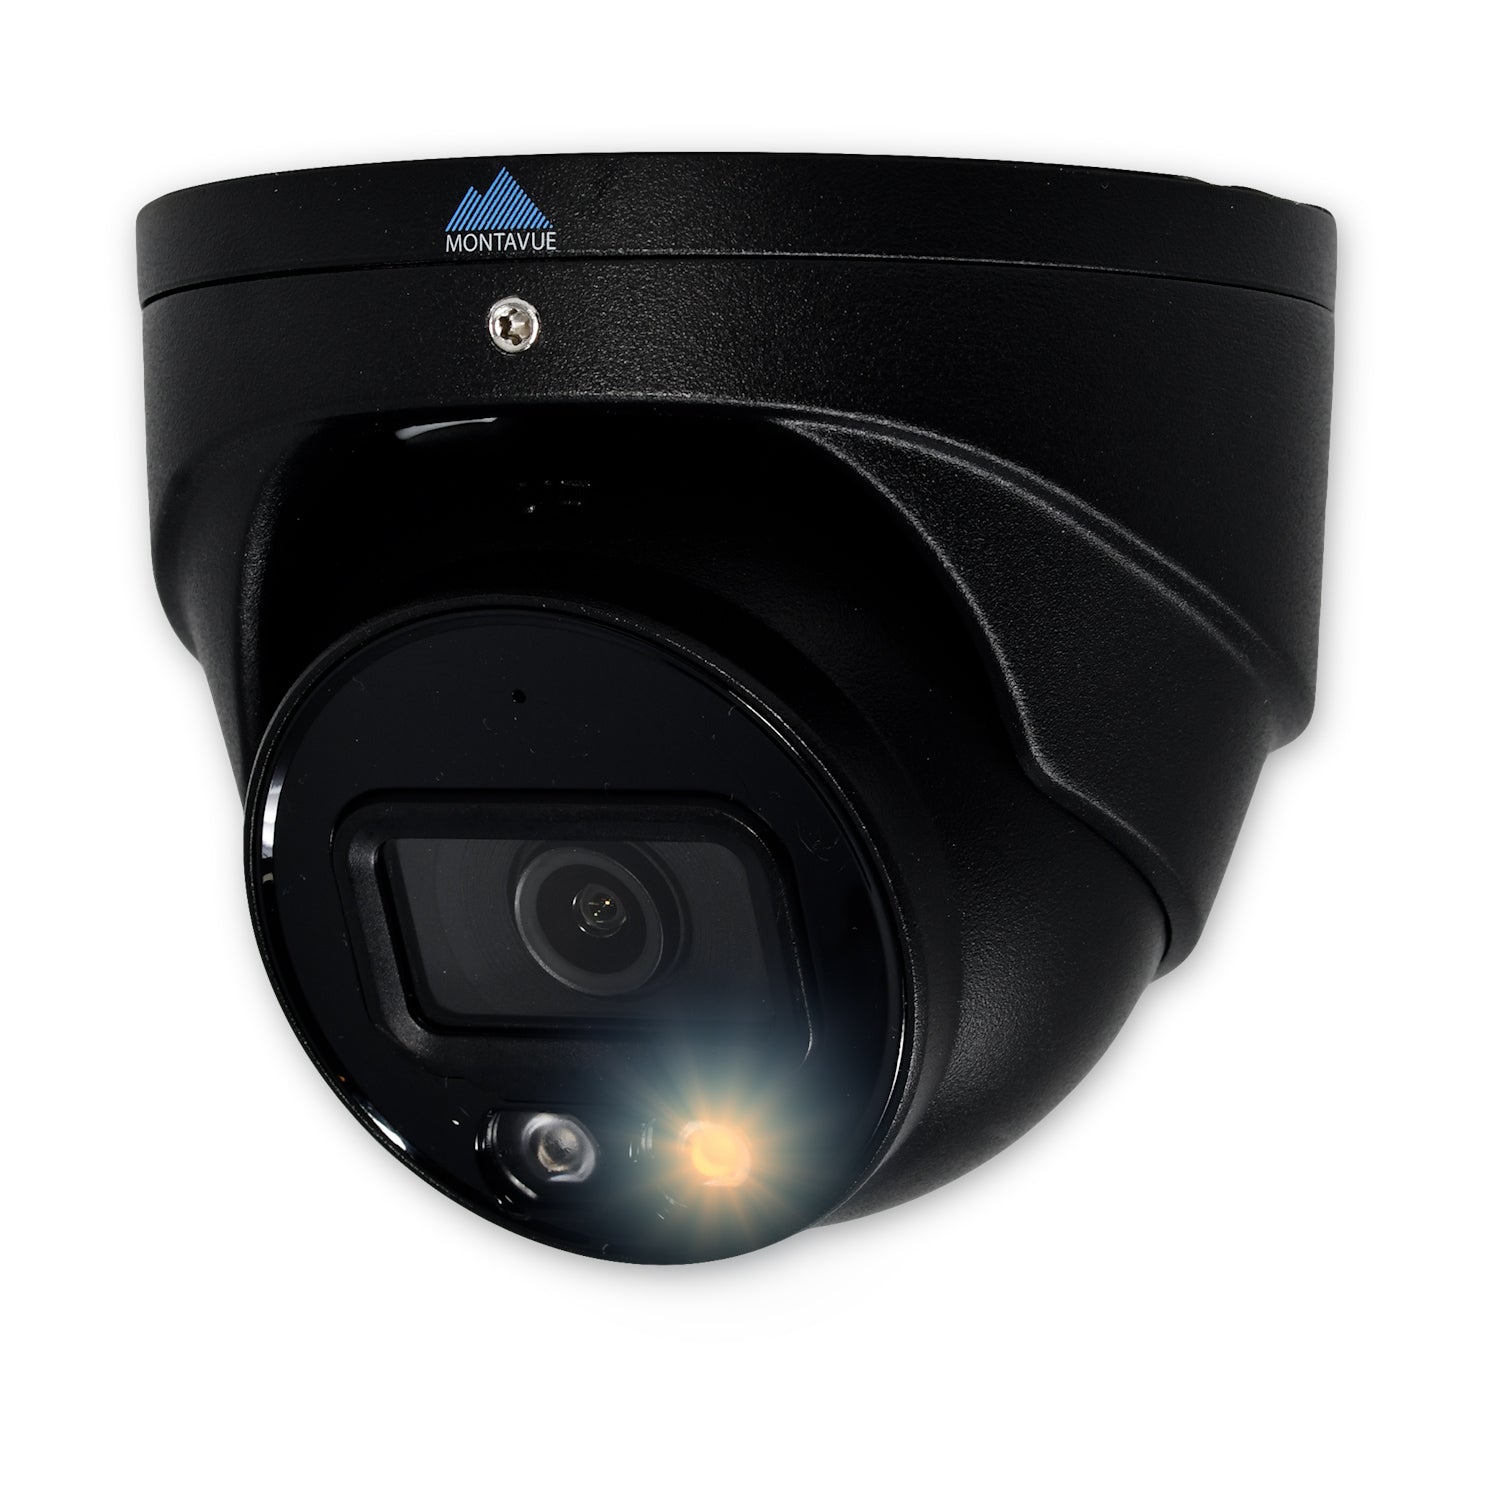 MTT4095 | 4MP 2K Turret Security Camera with SMD+ and Smart Dual Illum